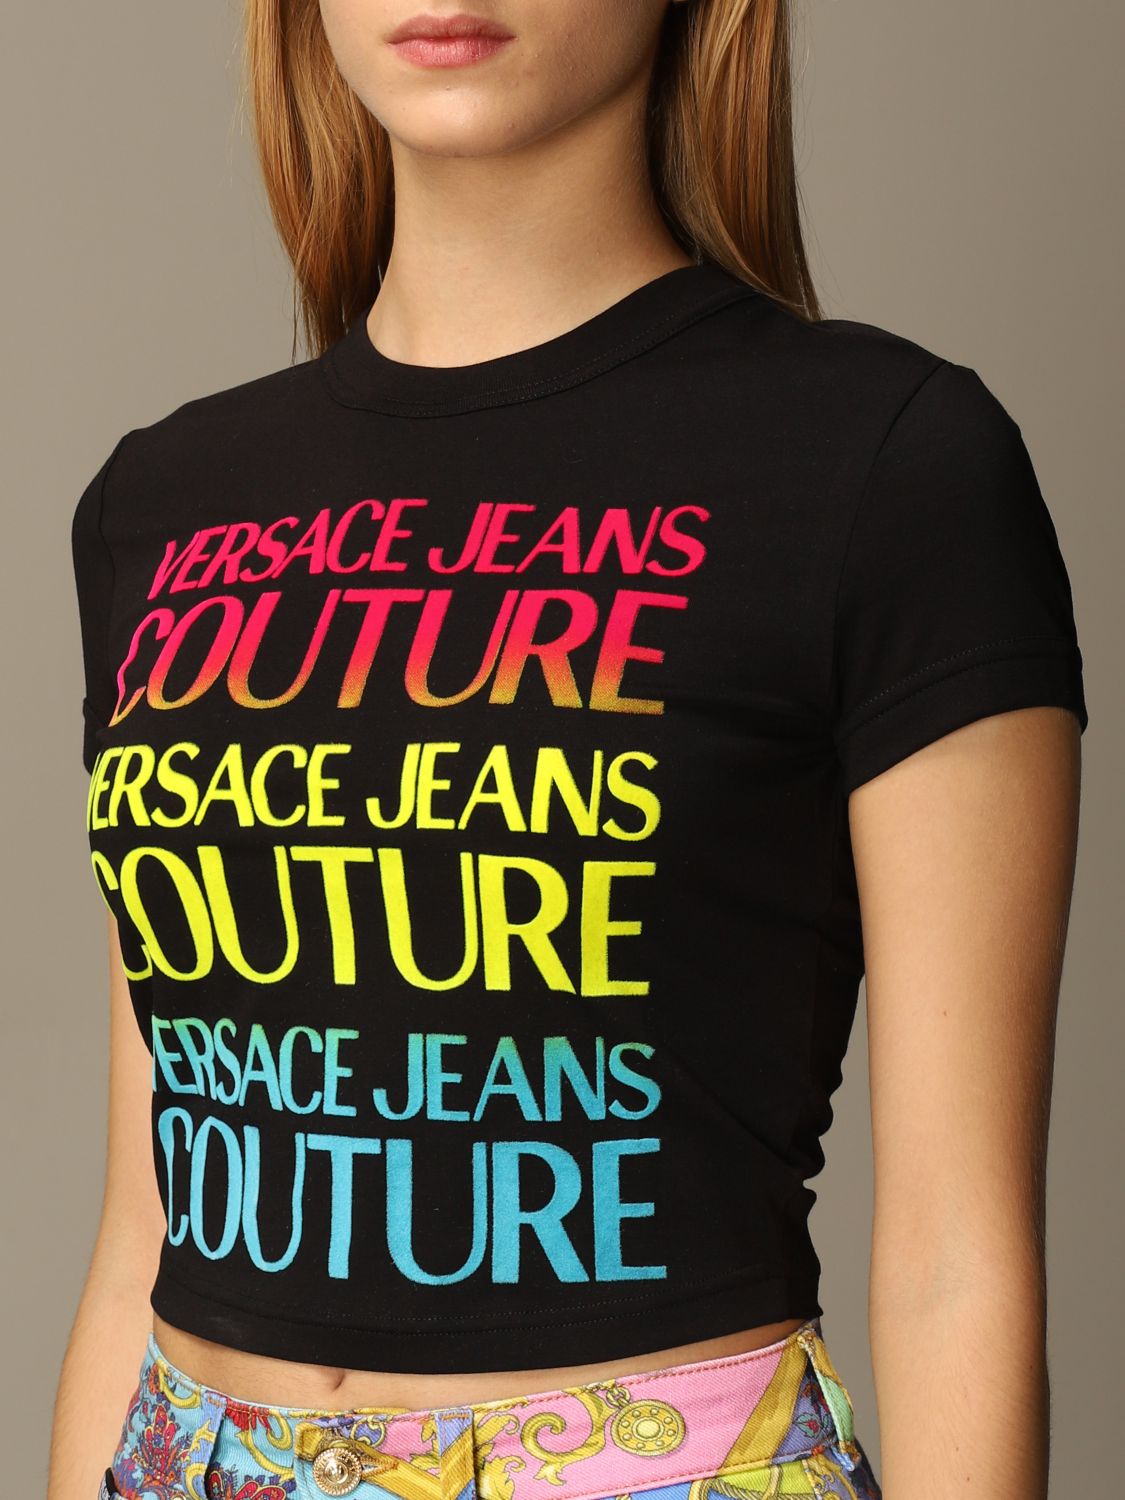 VERSACE JEANS COUTURE: Camiseta mujer, Negro | Camiseta Versace Jeans Couture B2HZA7GB30383 línea en GIGLIO.COM